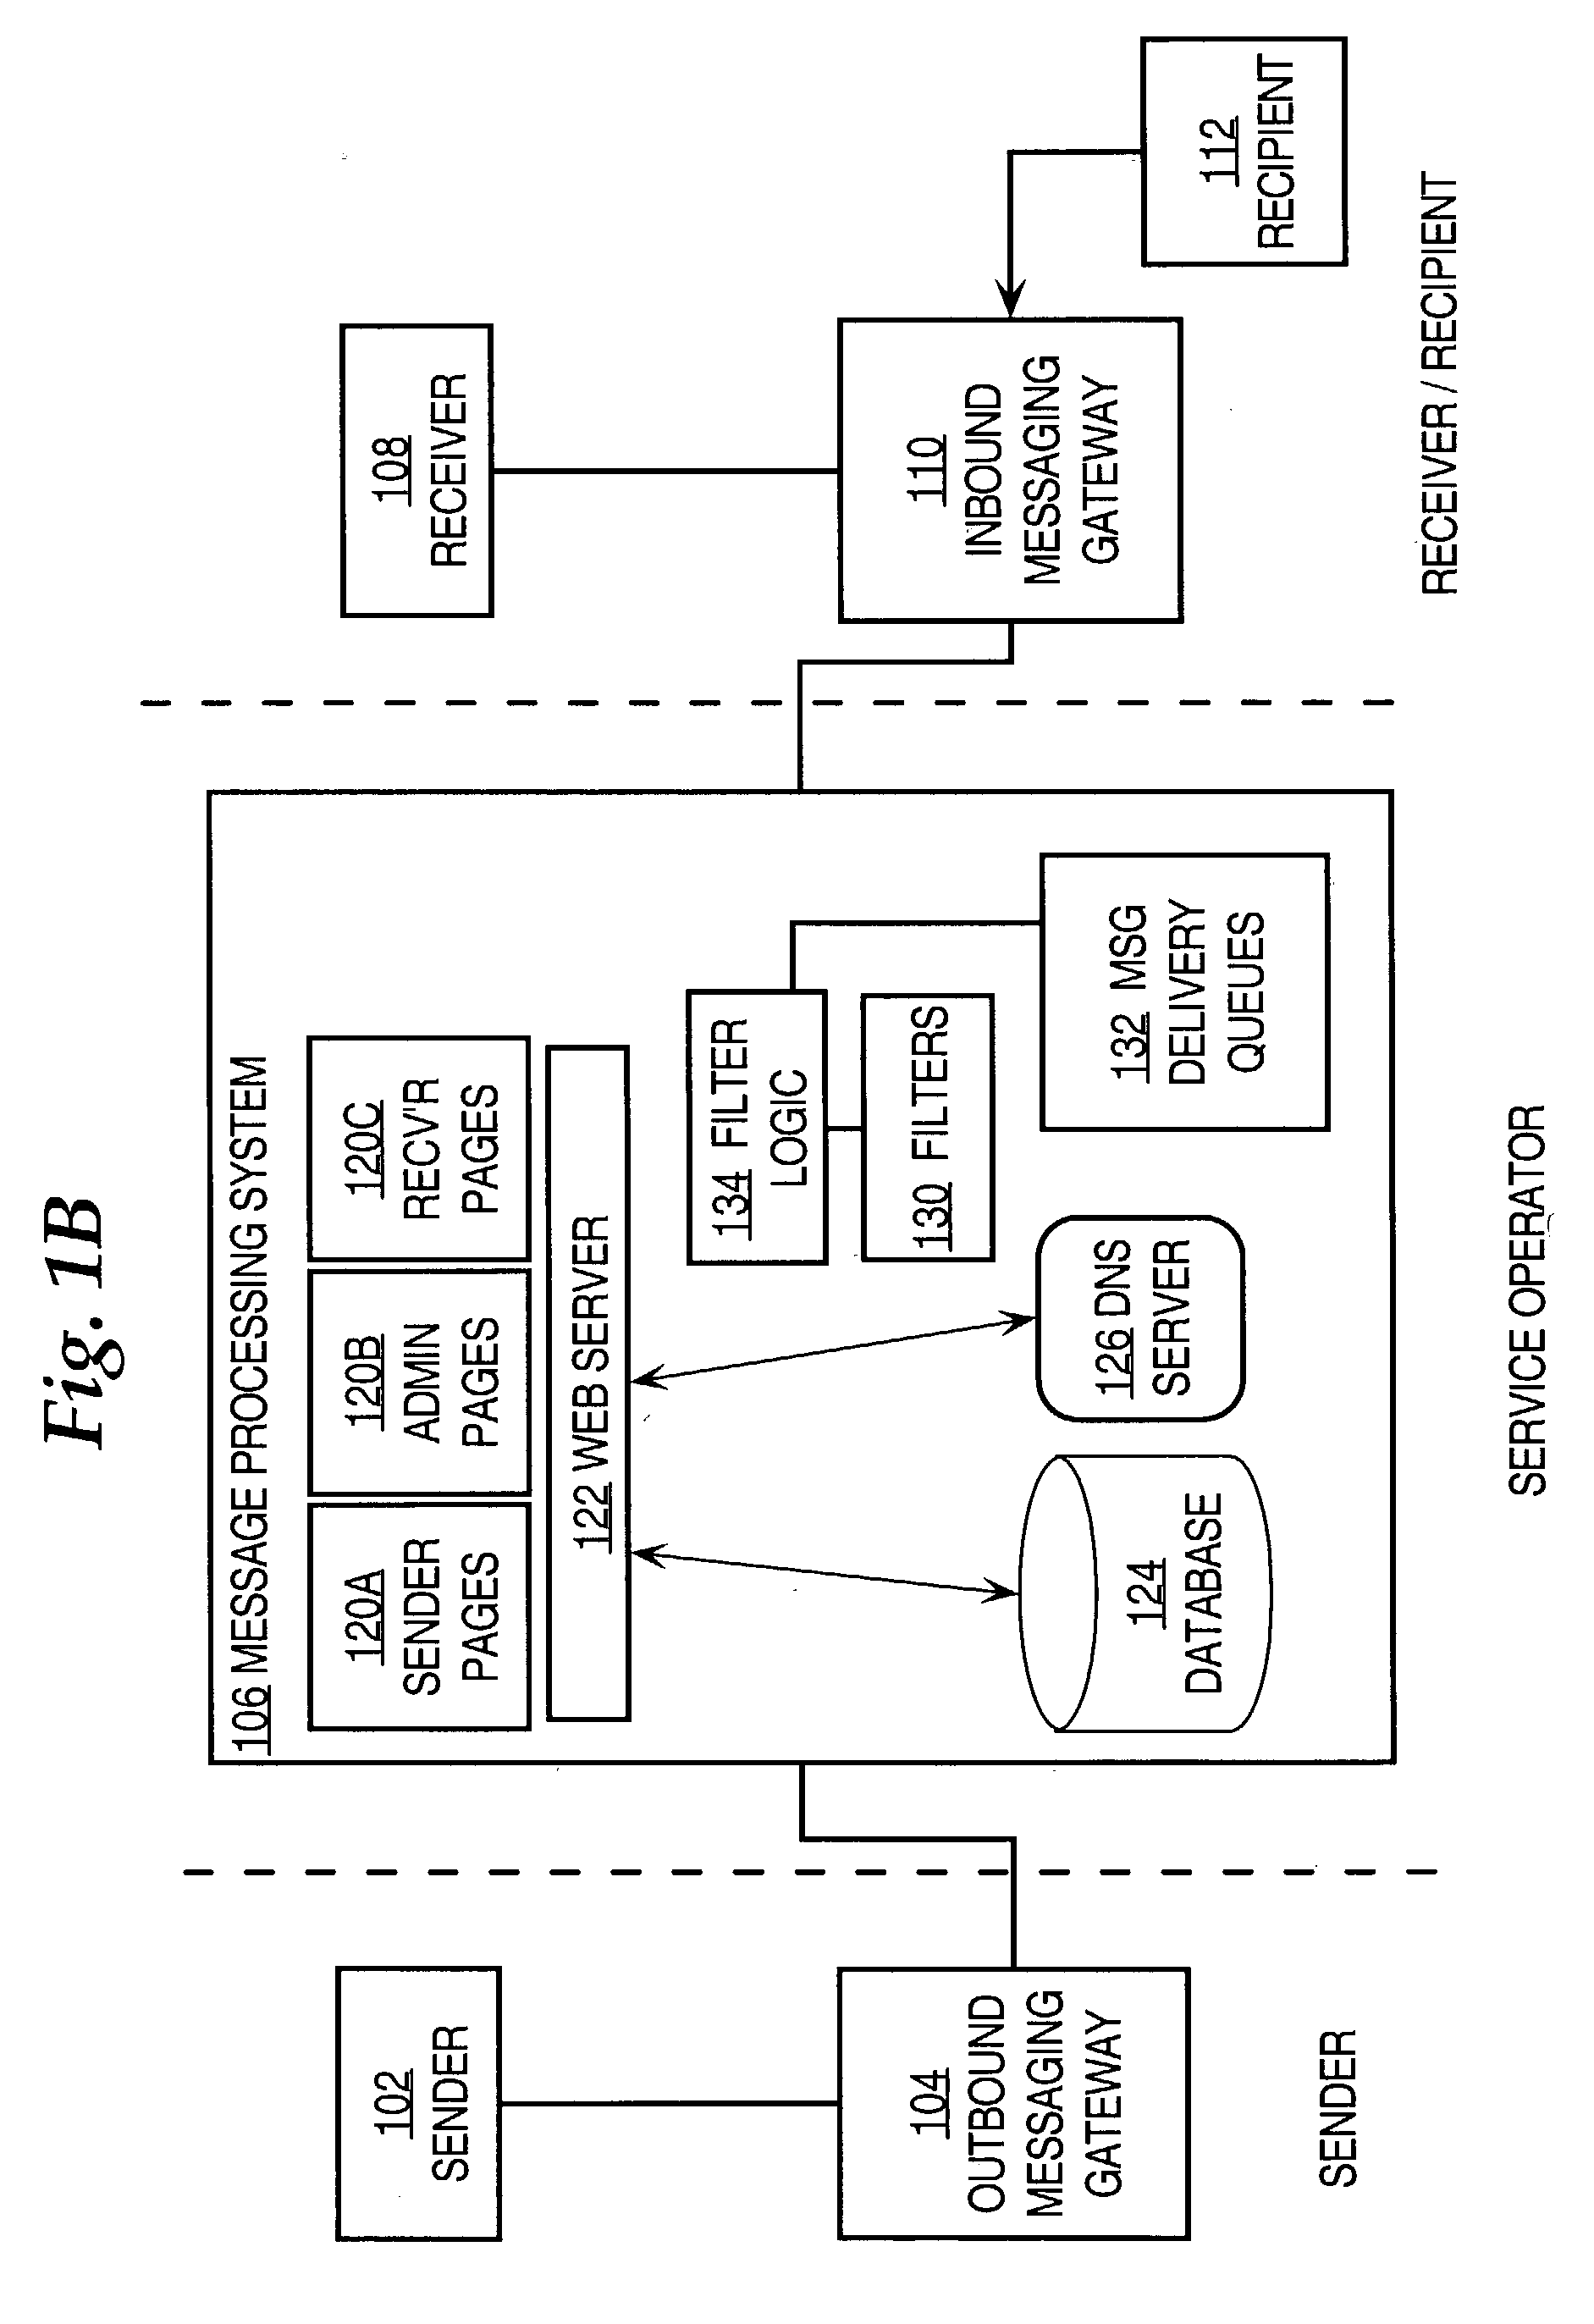 Electronic message delivery using an alternate source approach